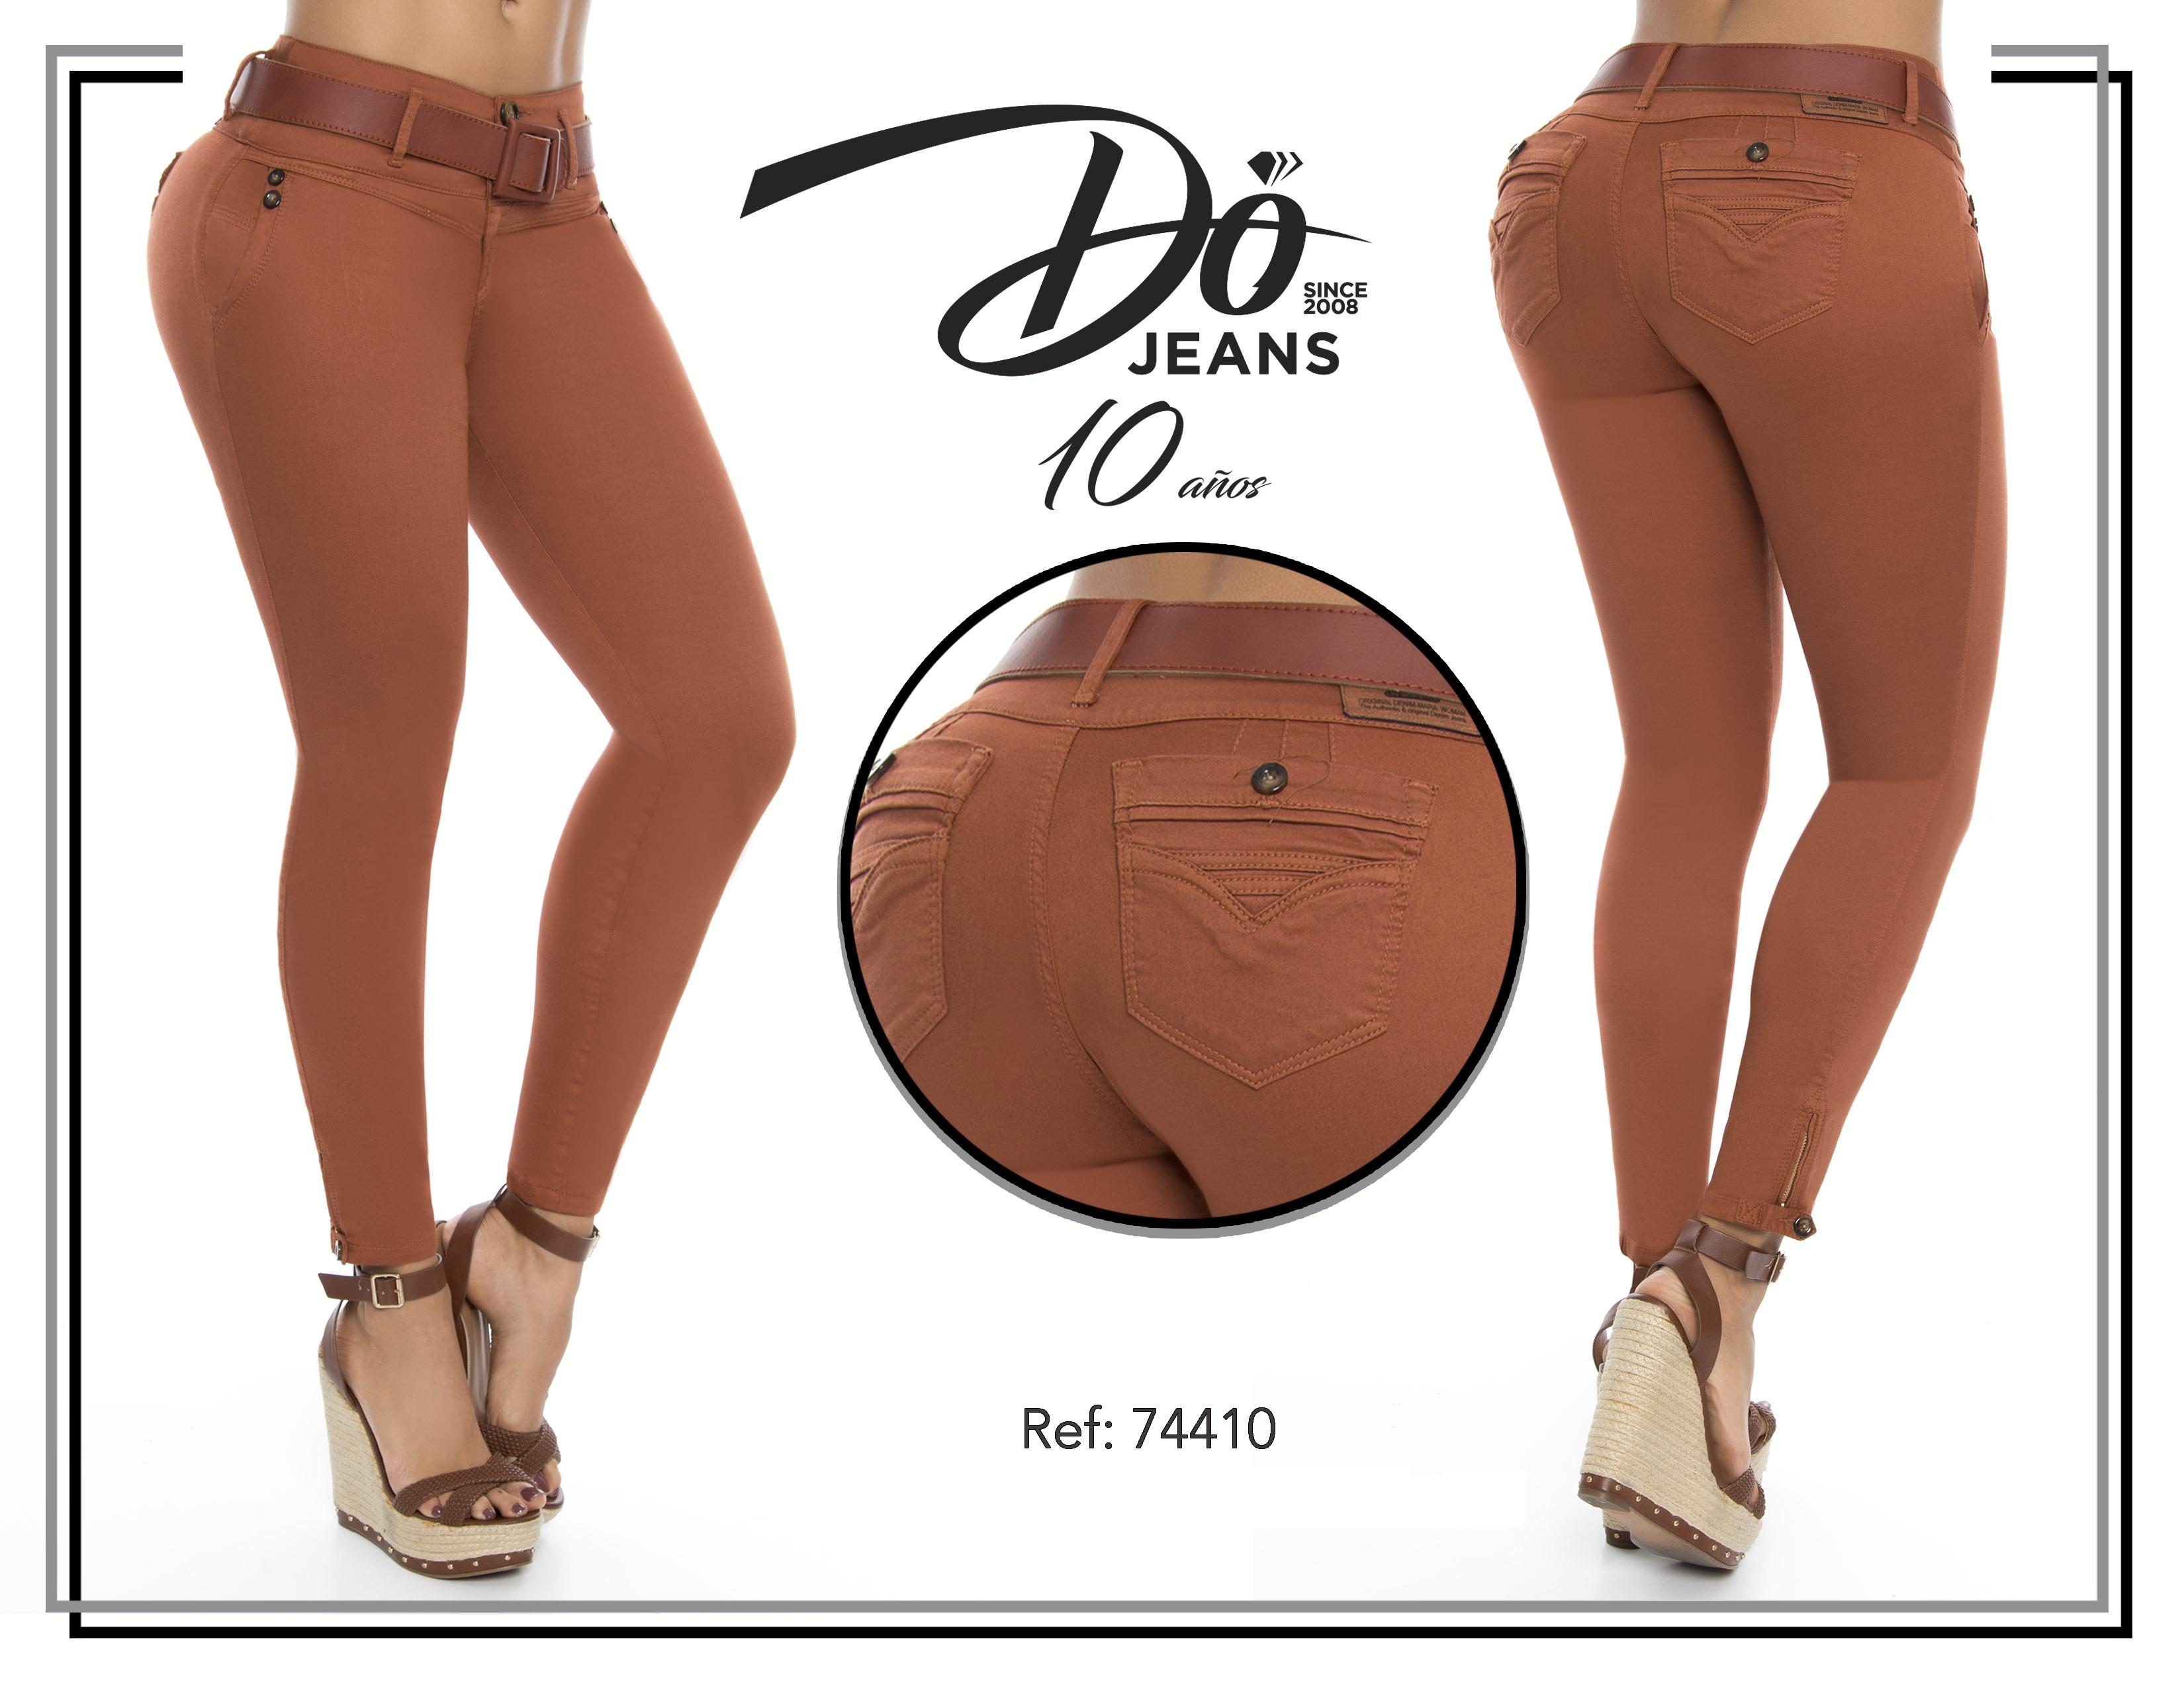 Jeans Levantacola Colombiano - Ref. 248 -74410 D